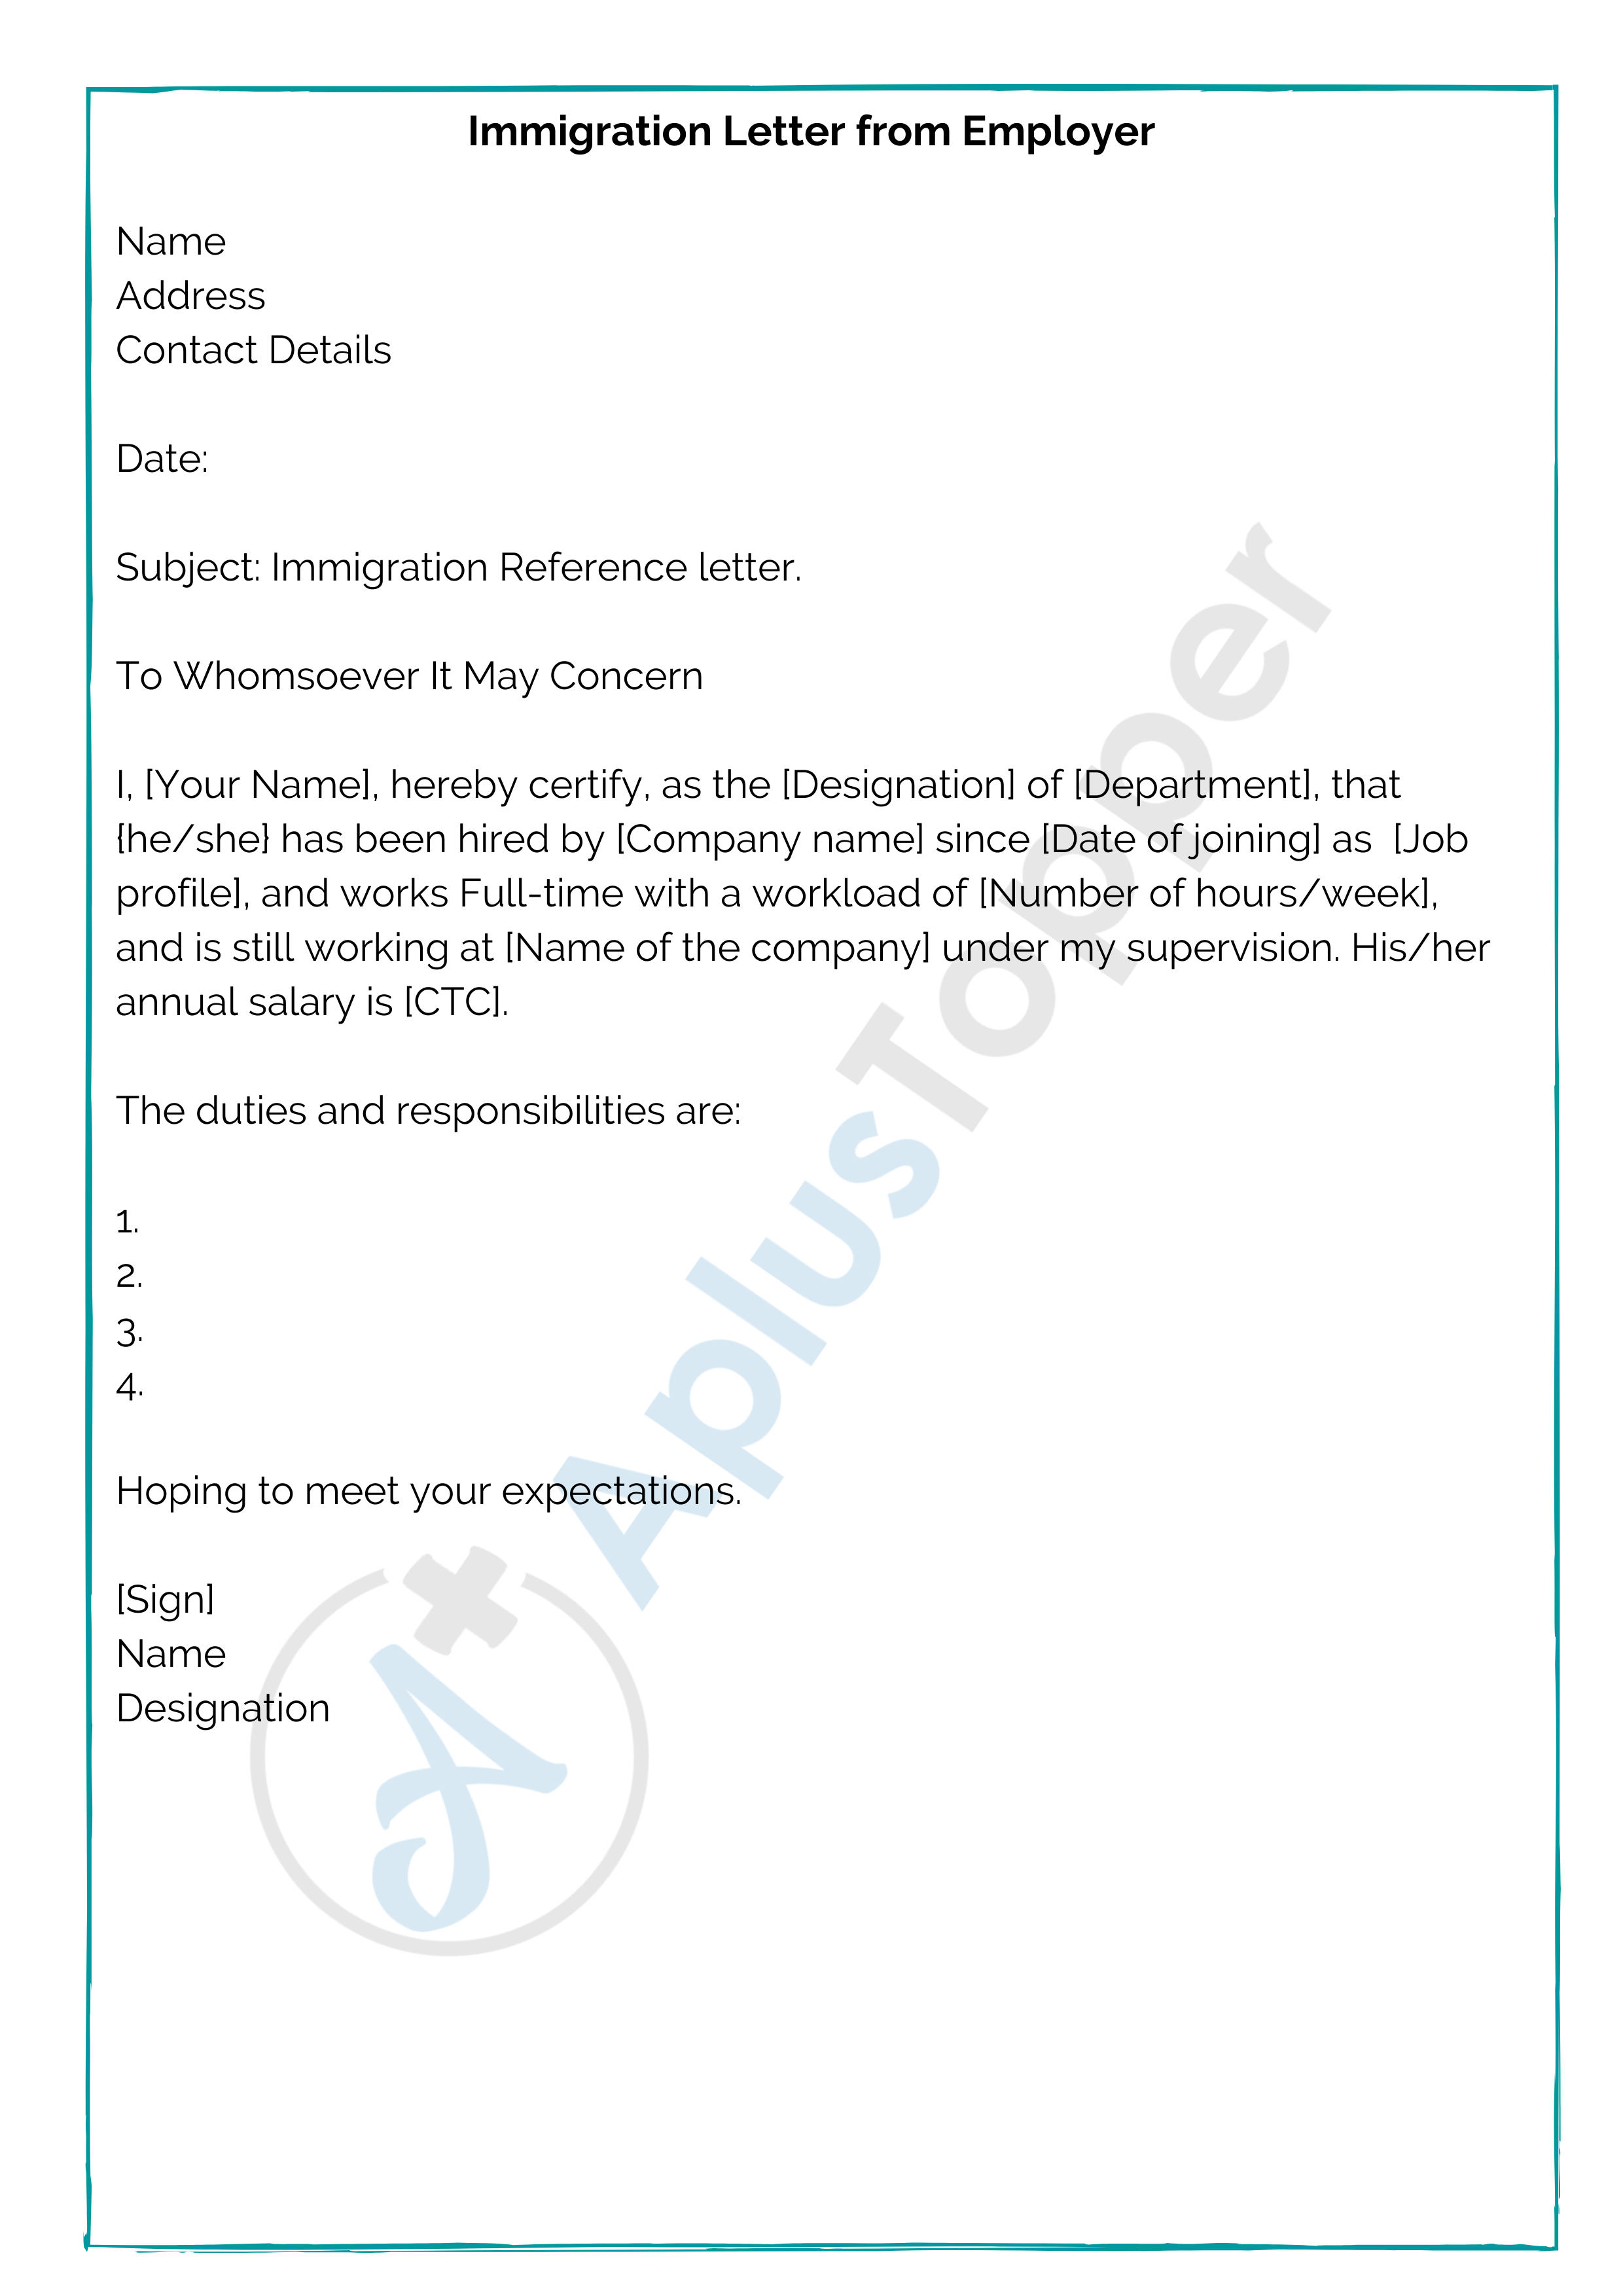 Immigration Letter  Format, Templates, How To Write An